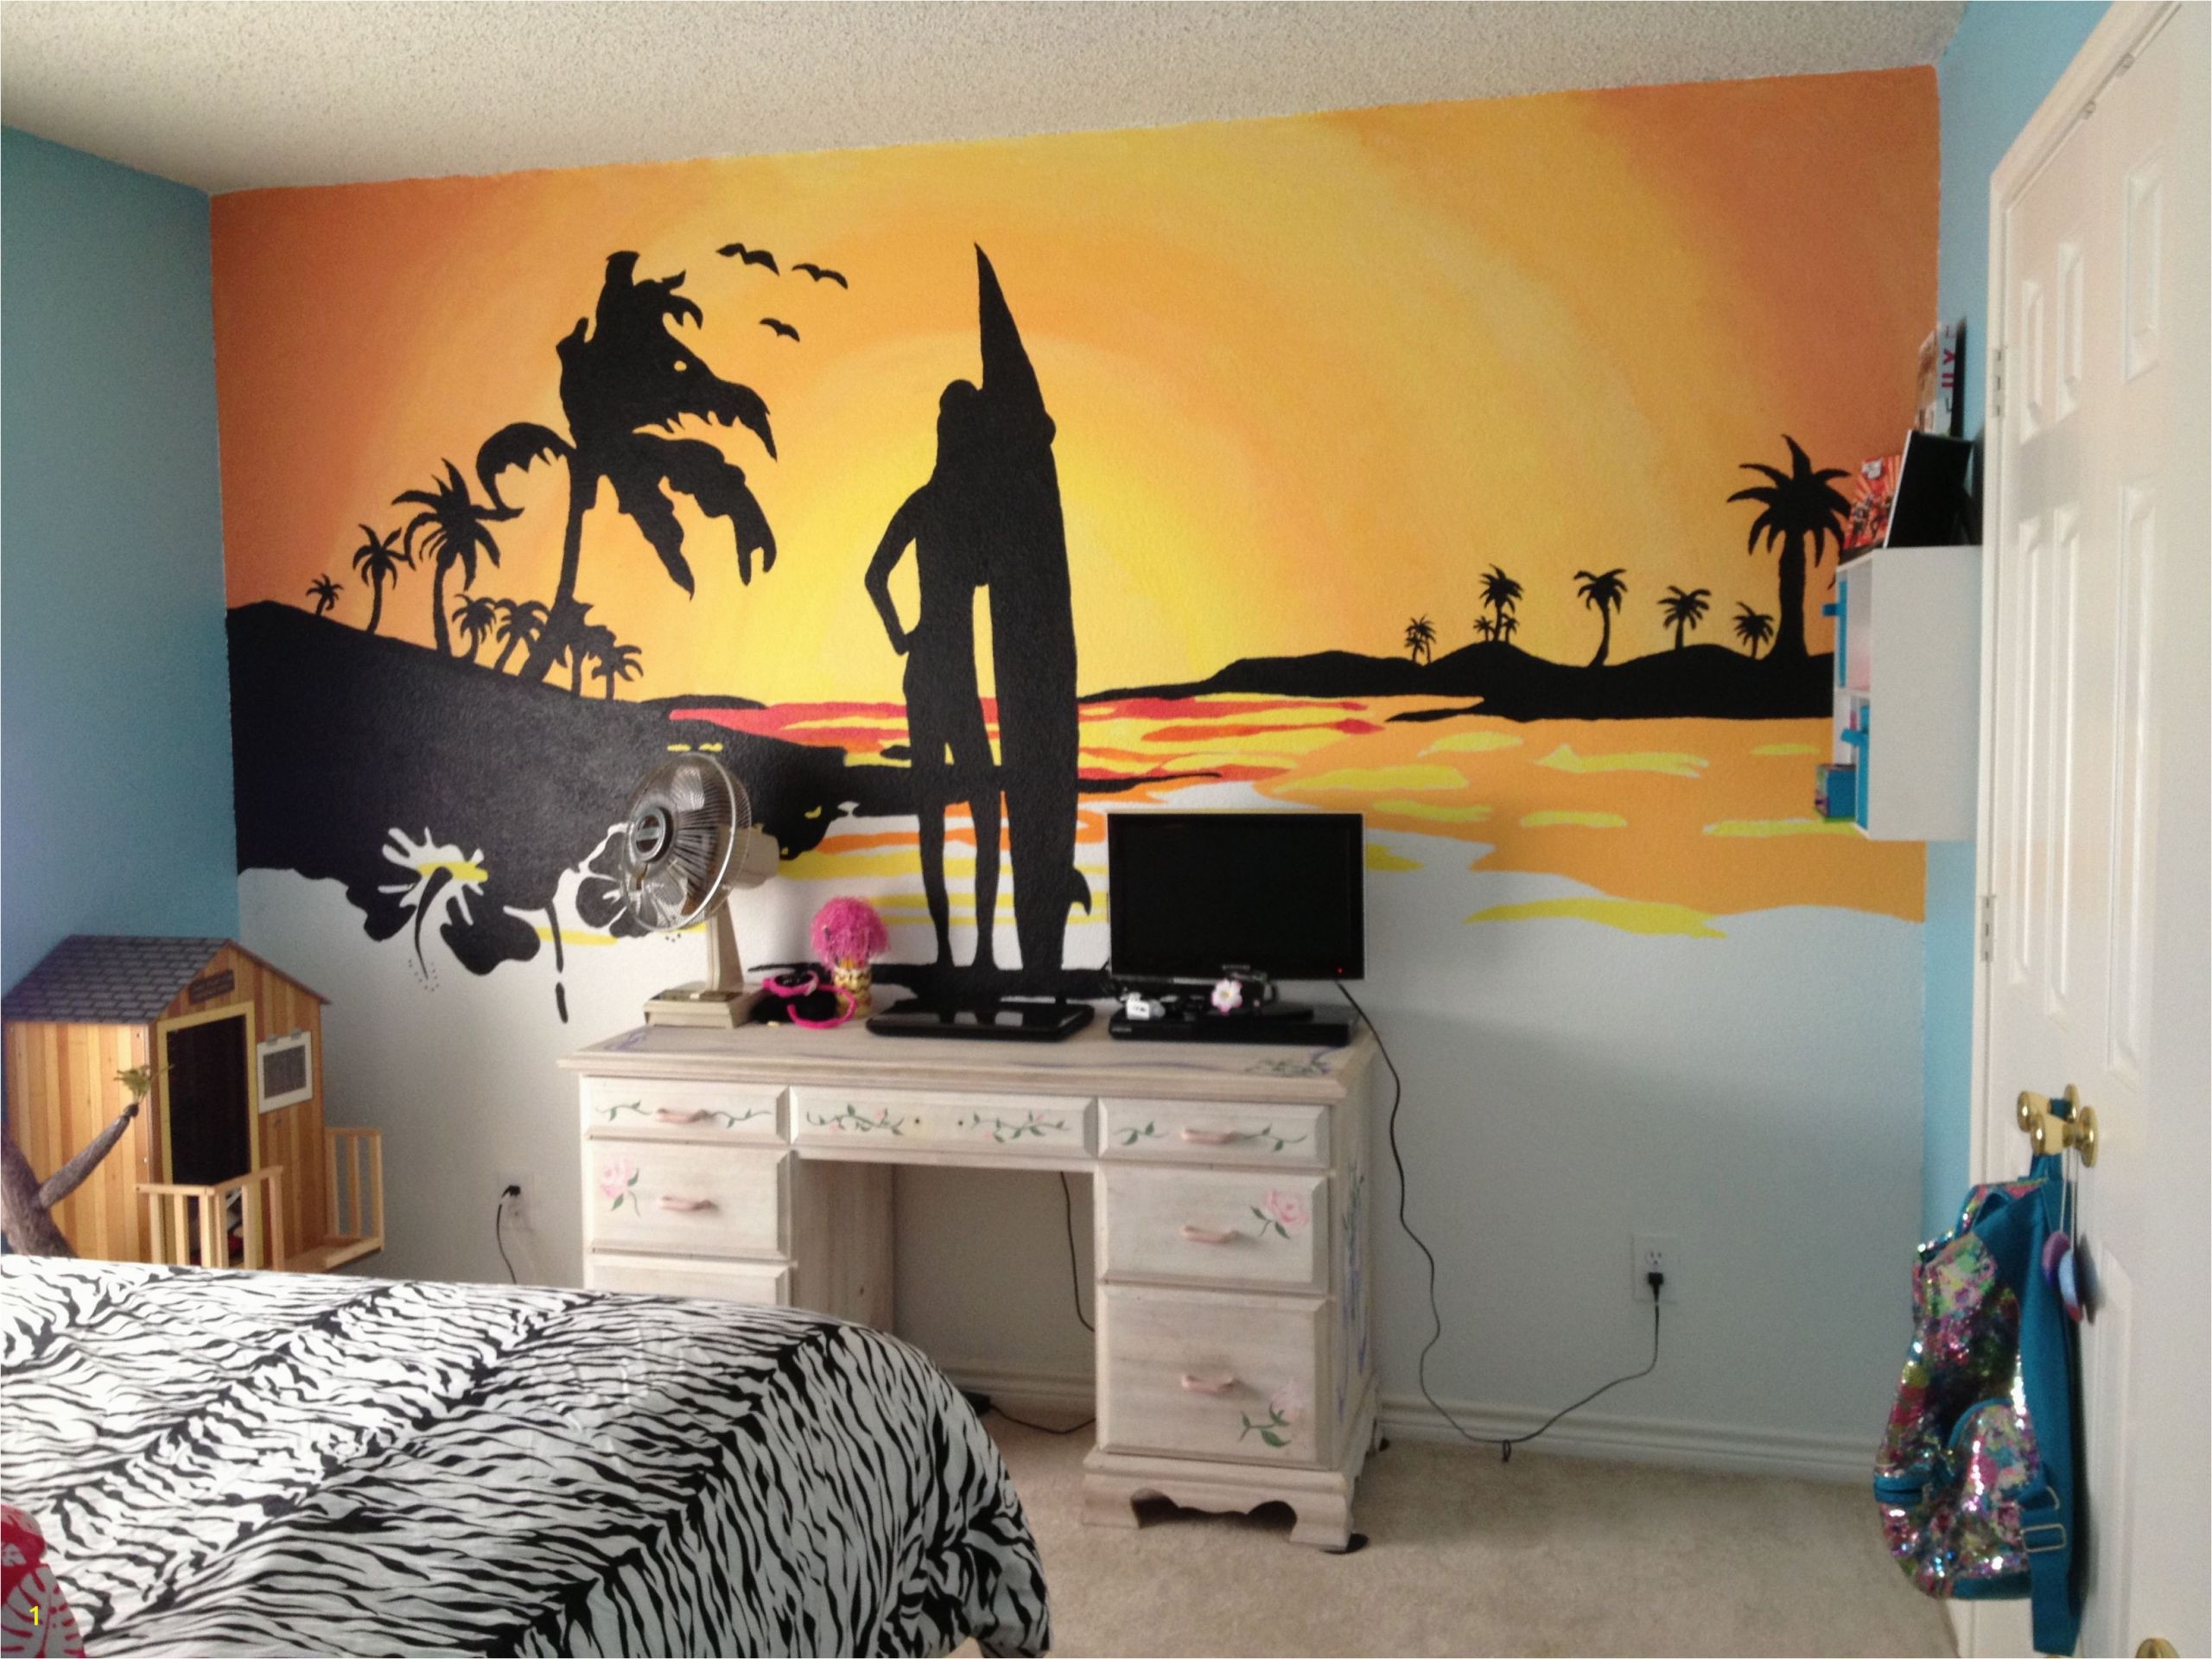 Sunset Wall Mural Painting Beach Sunset Mural My Husband and I Painted for My 10 Year